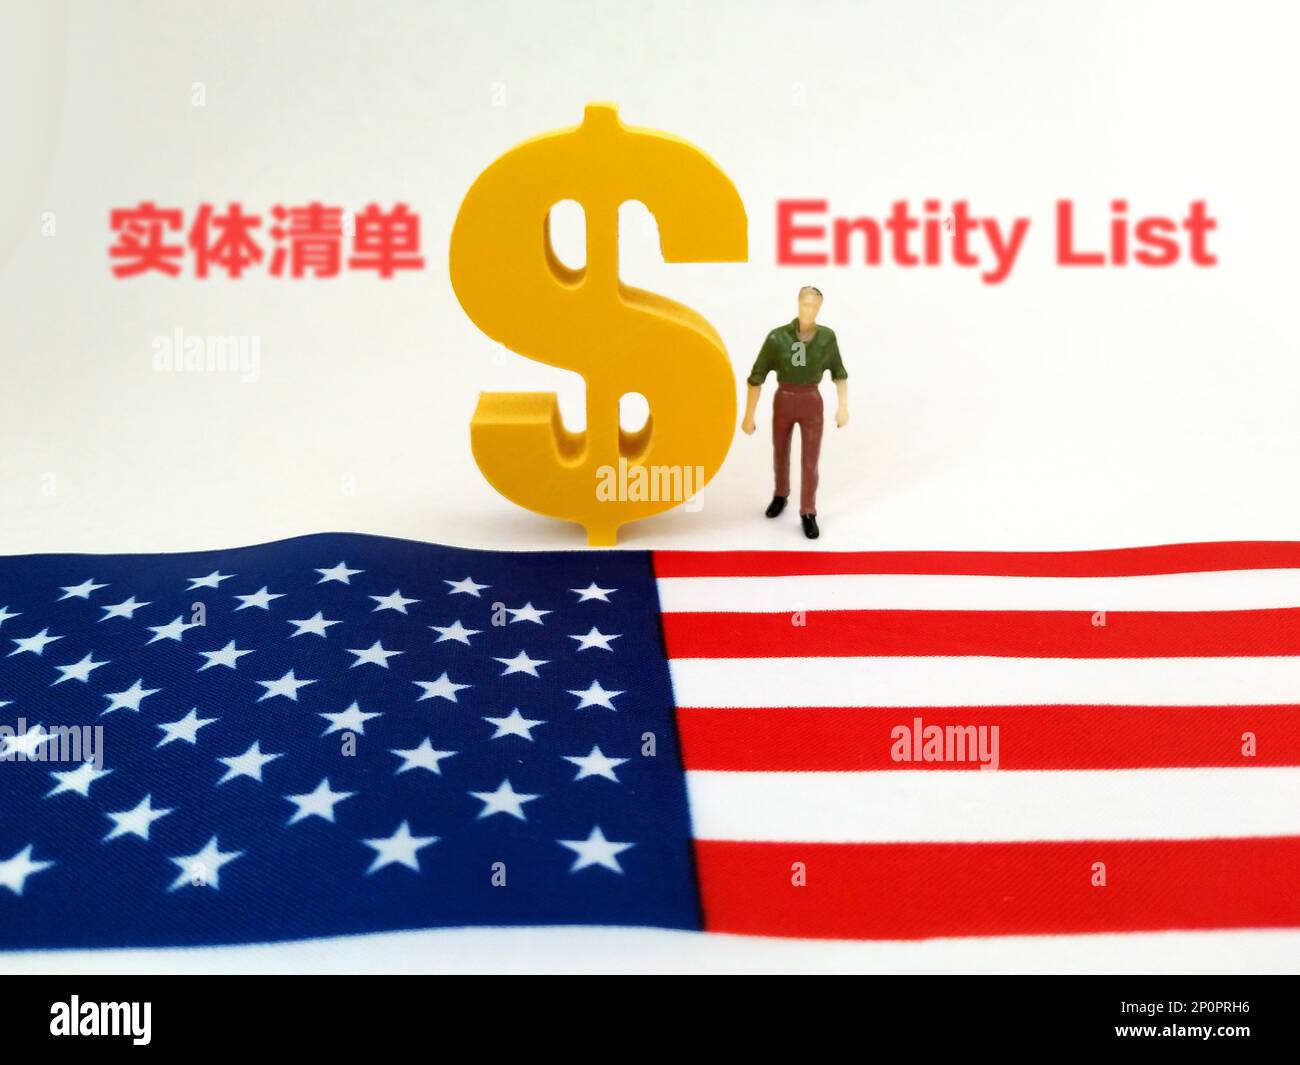 SUQIAN, CHINA - AUGUST 1, 2021 - Illustration: Entity List, Suqian, Jiangsu, China, March 3, 2023. In the early morning of March 3, Beijing time, the Stock Photo